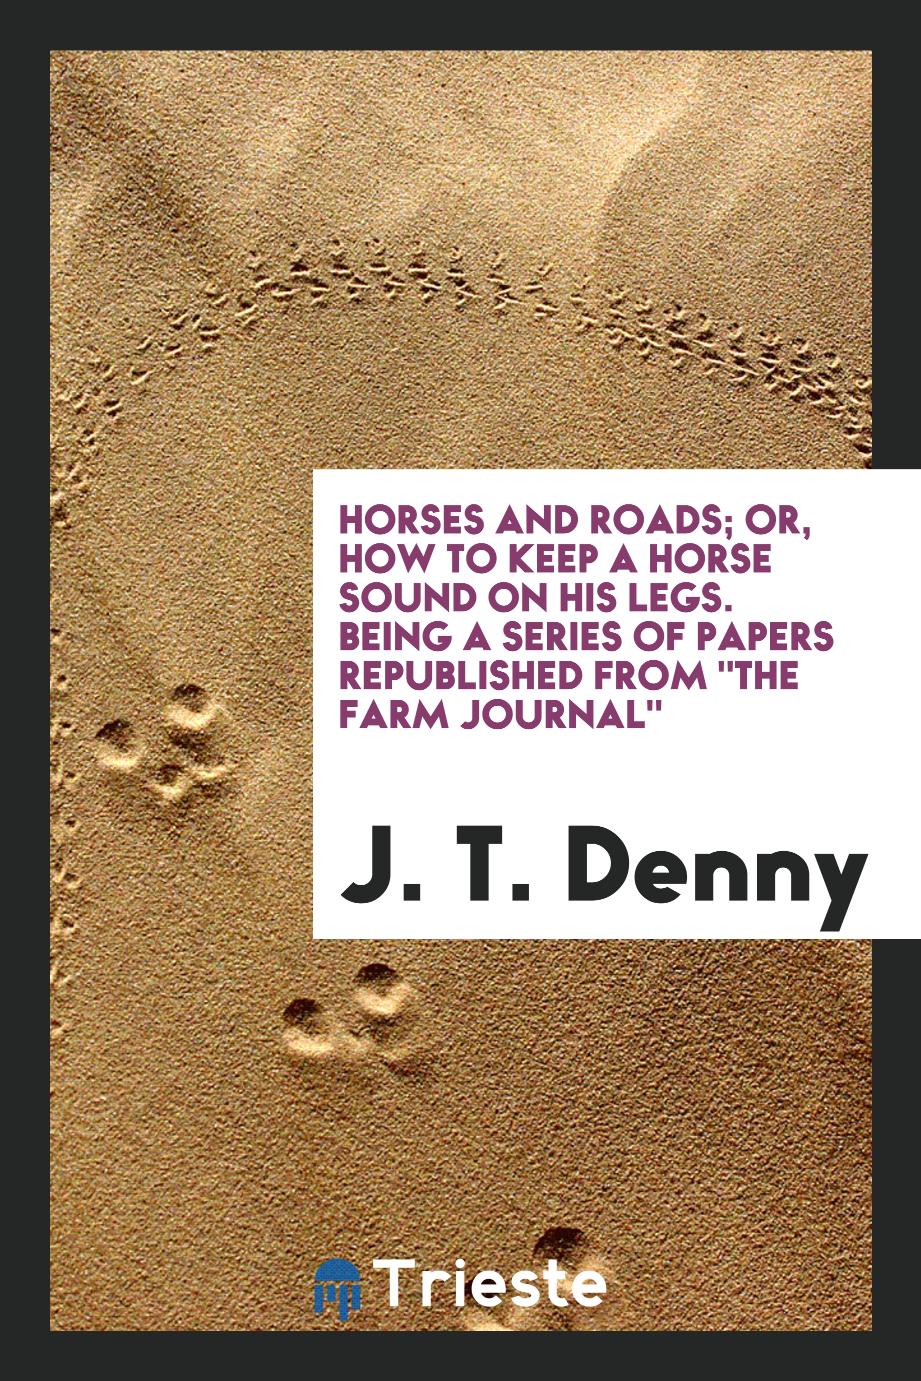 Horses and roads; or, How to keep a horse sound on his legs. Being a series of papers republished from "The Farm journal"